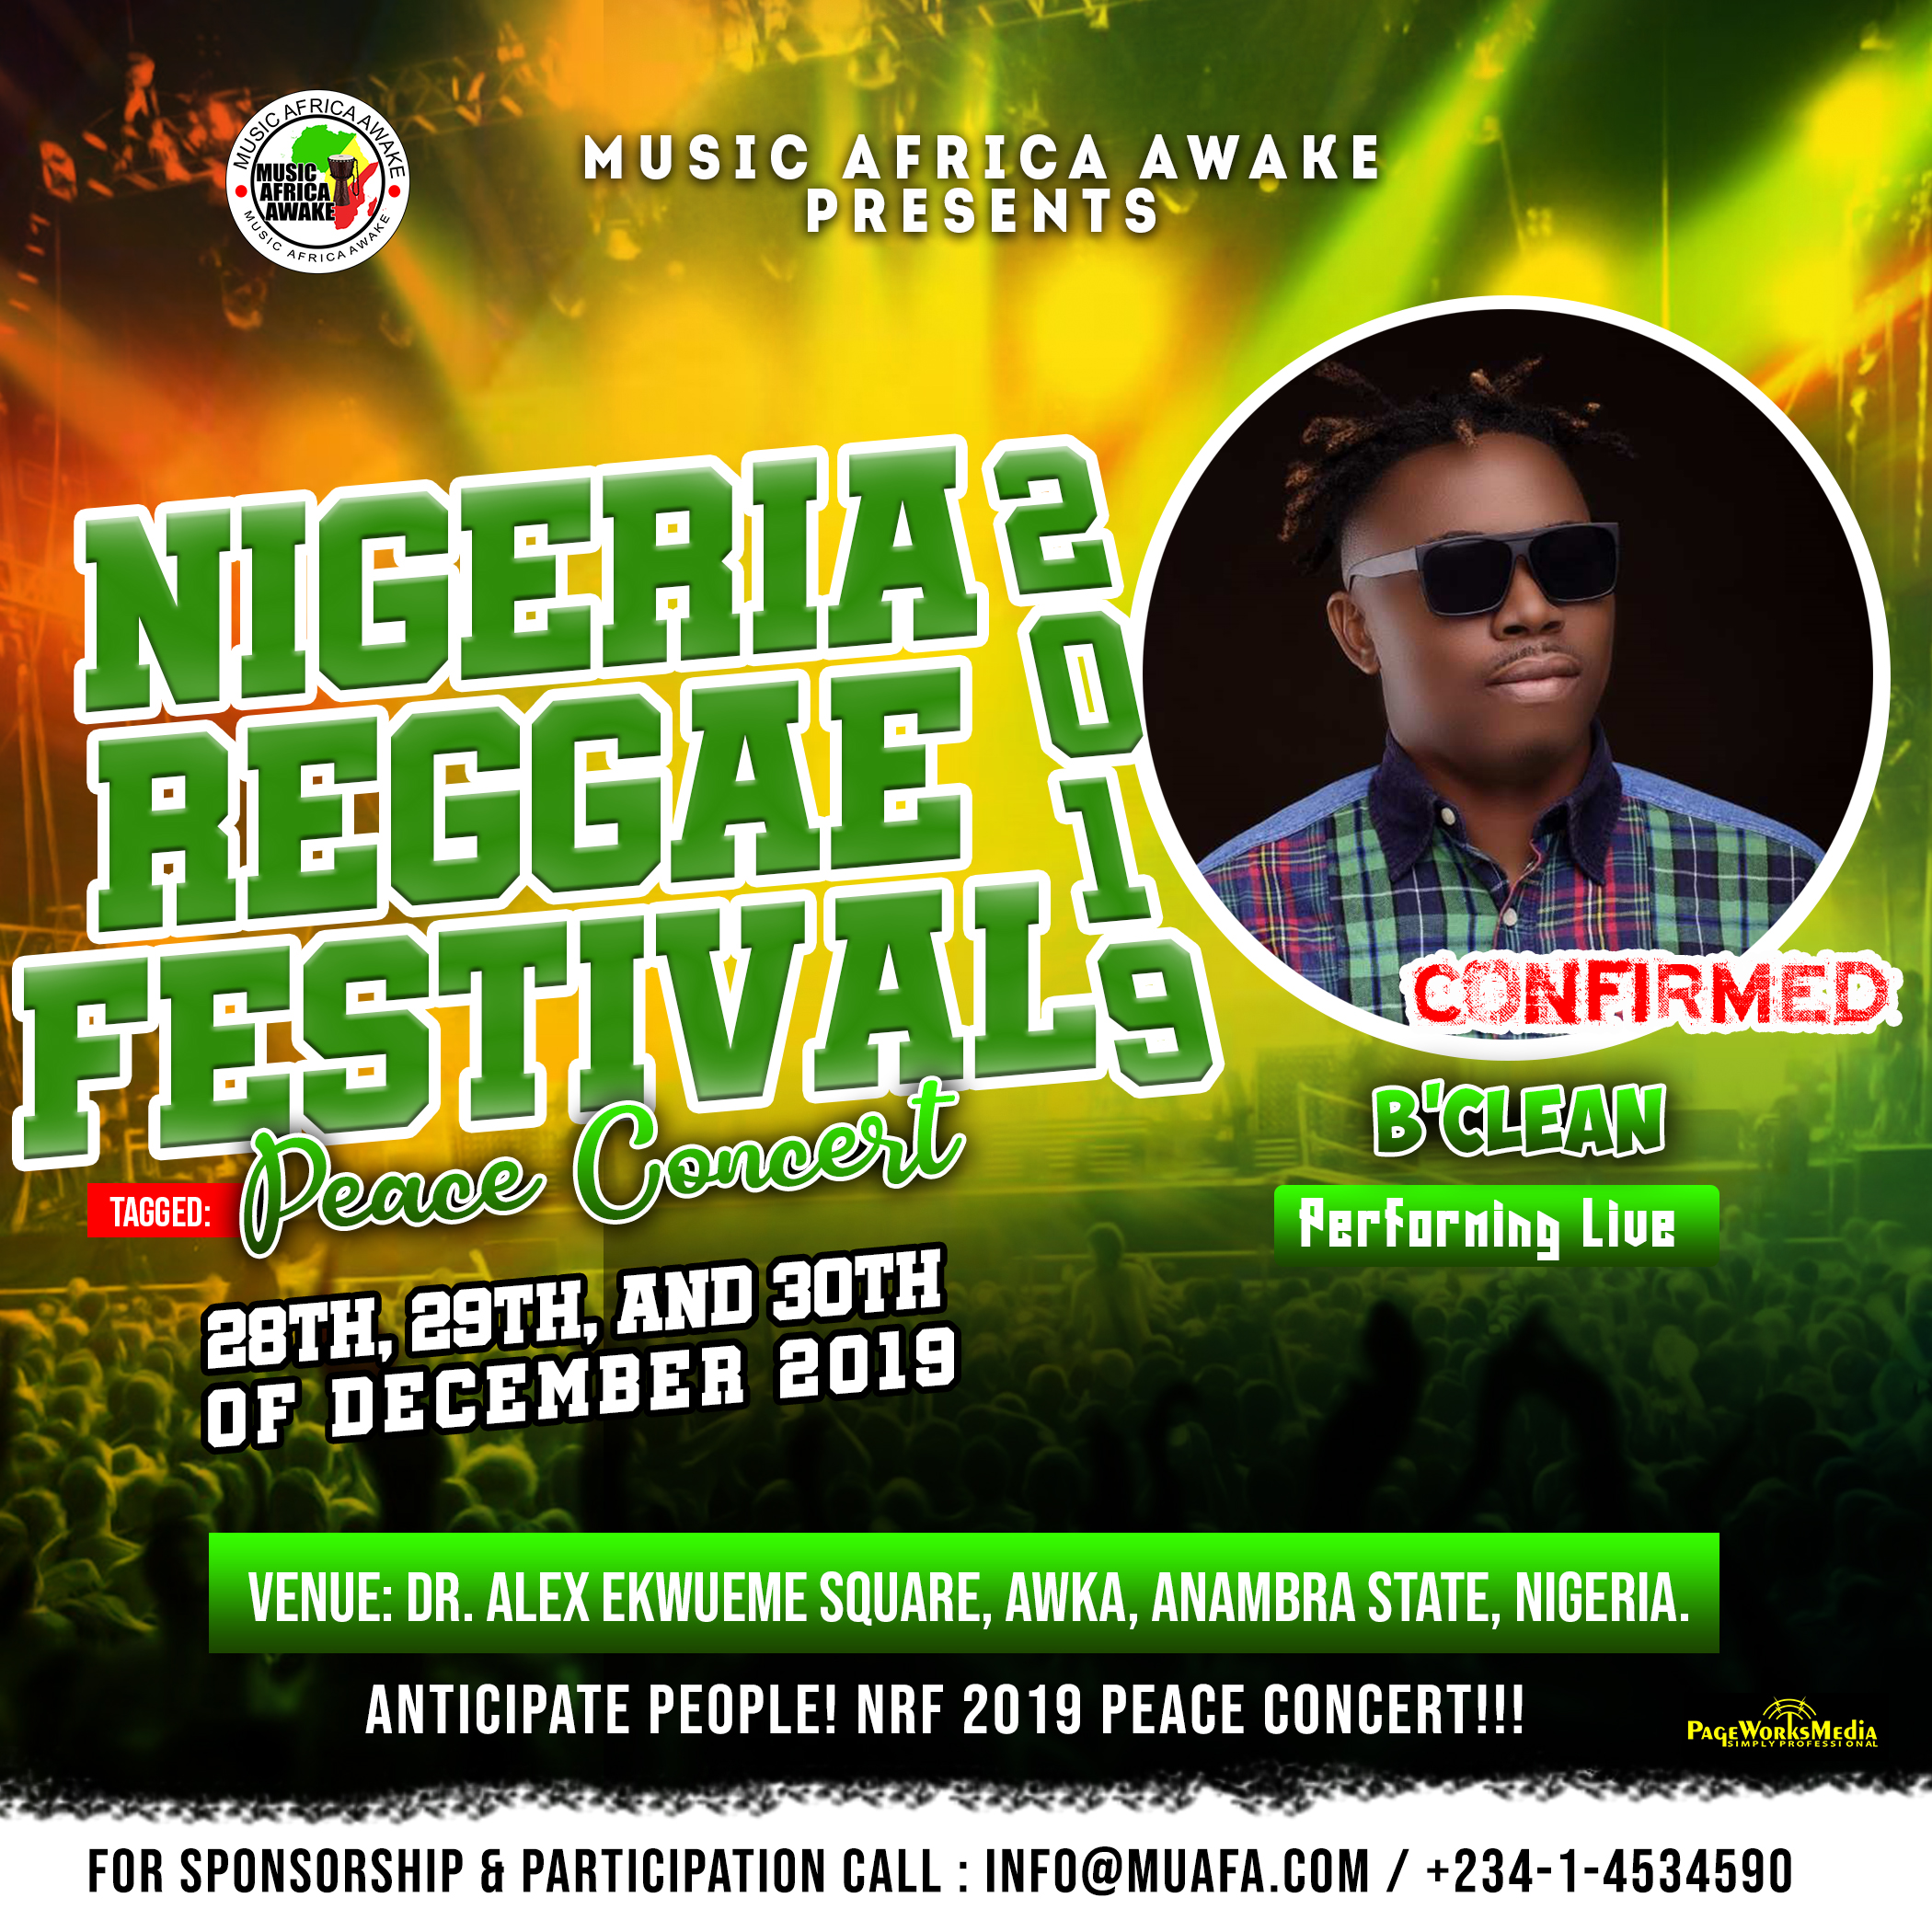 B'Clean to perform live at the Nigeria Reggae Festival 2019